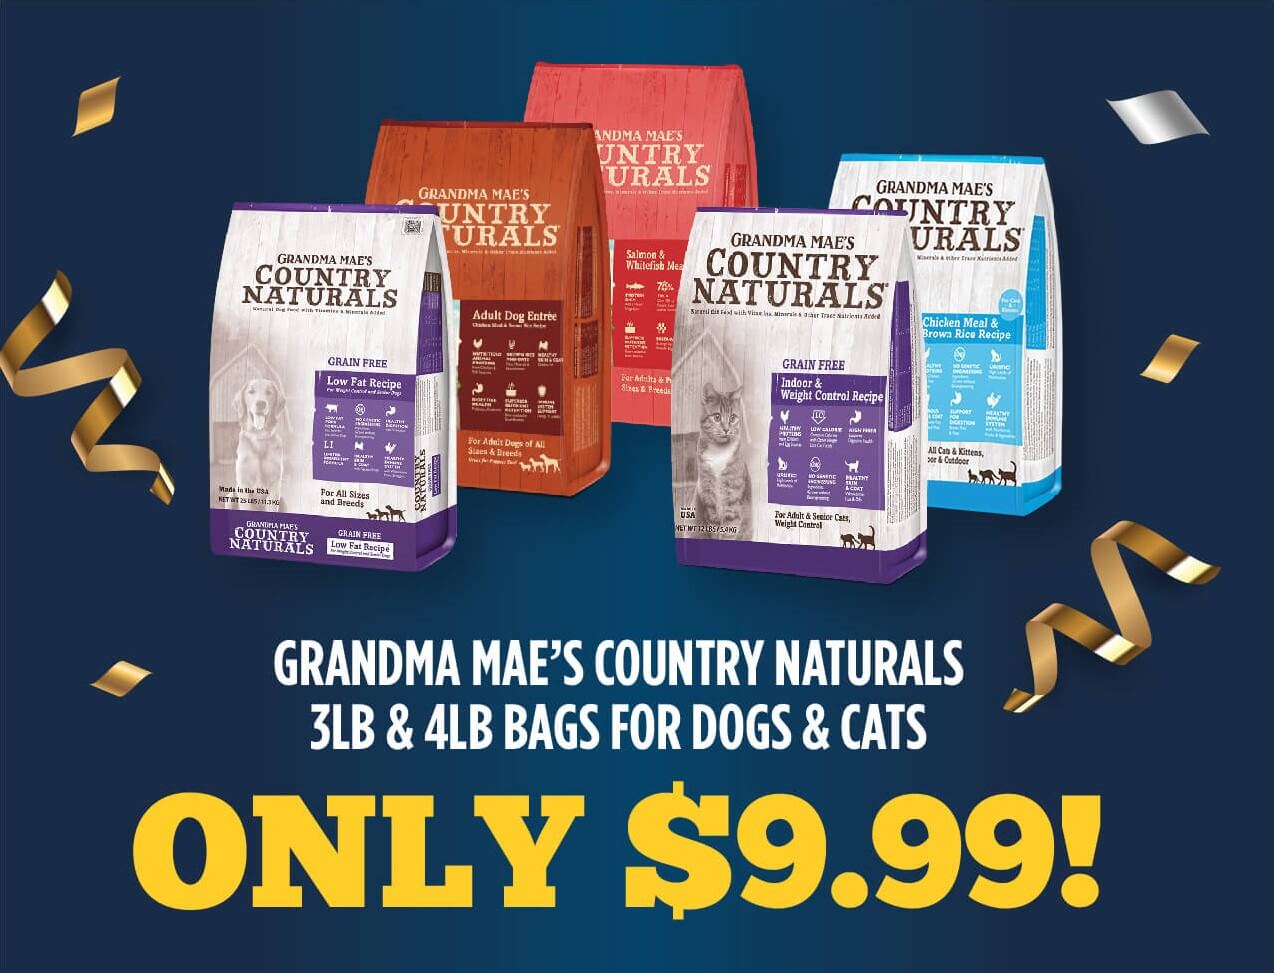 Country Naturals Dog & Cat 3lb & 4lb bags ONLY $9.99